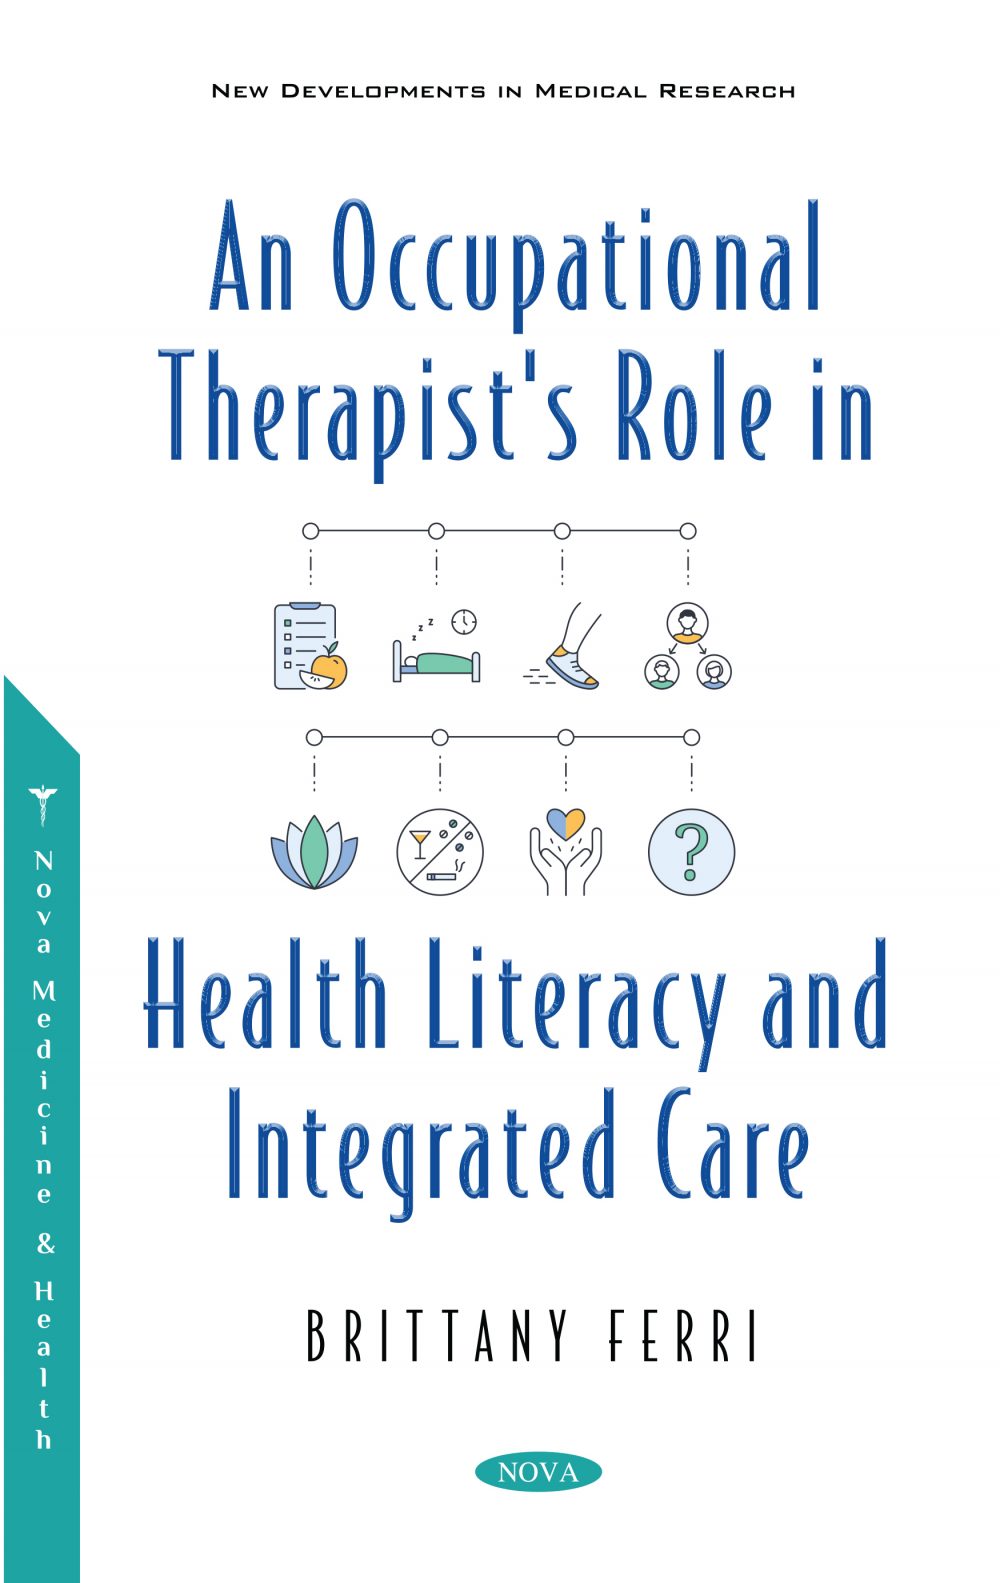 An Occupational Therapists Role in Health Literacy and Integrated Care by Brittany Ferri